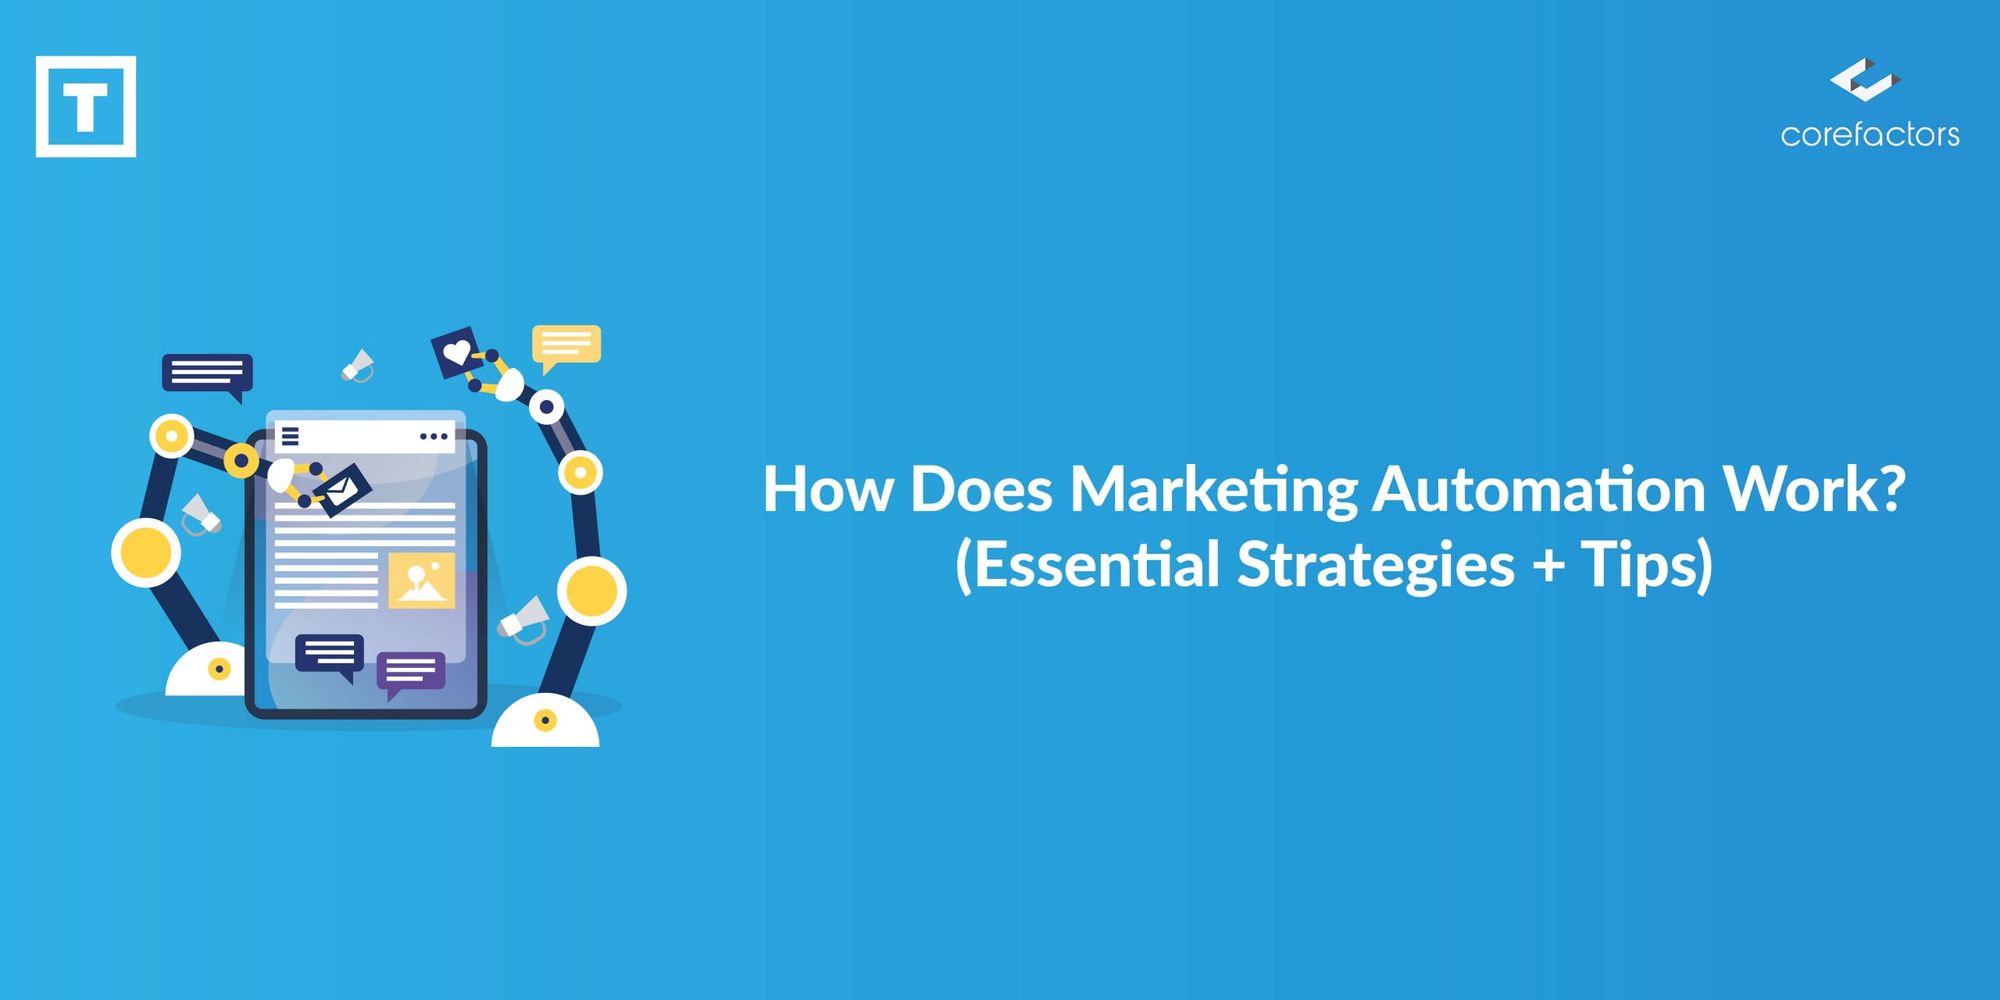 How Does Marketing Automation Work? (Essential Strategies + Tips)